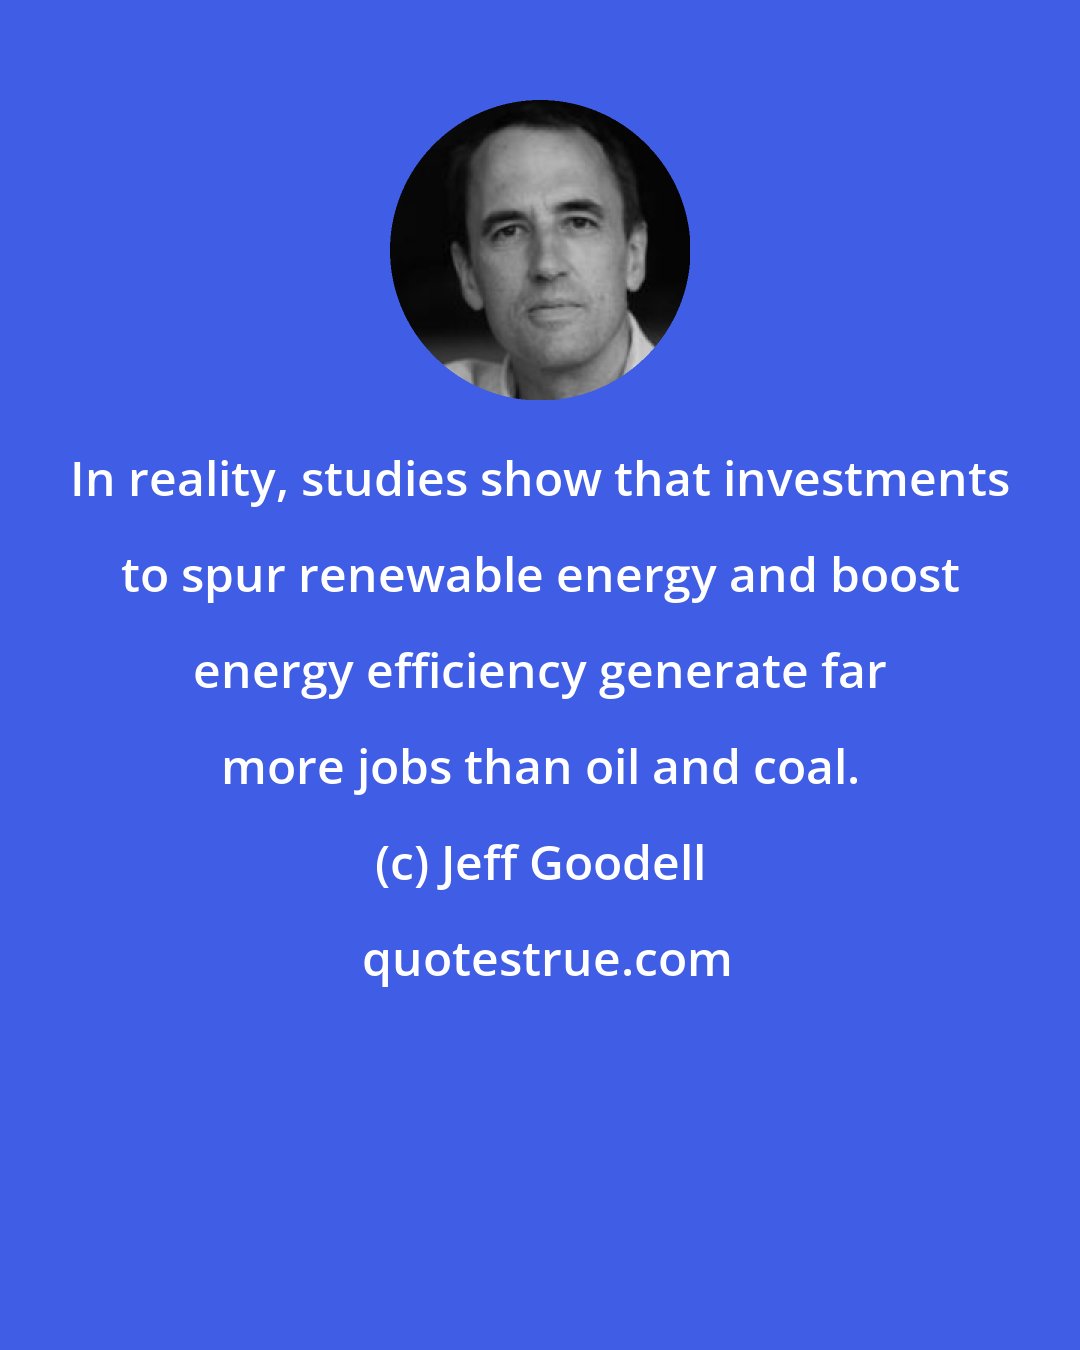 Jeff Goodell: In reality, studies show that investments to spur renewable energy and boost energy efficiency generate far more jobs than oil and coal.